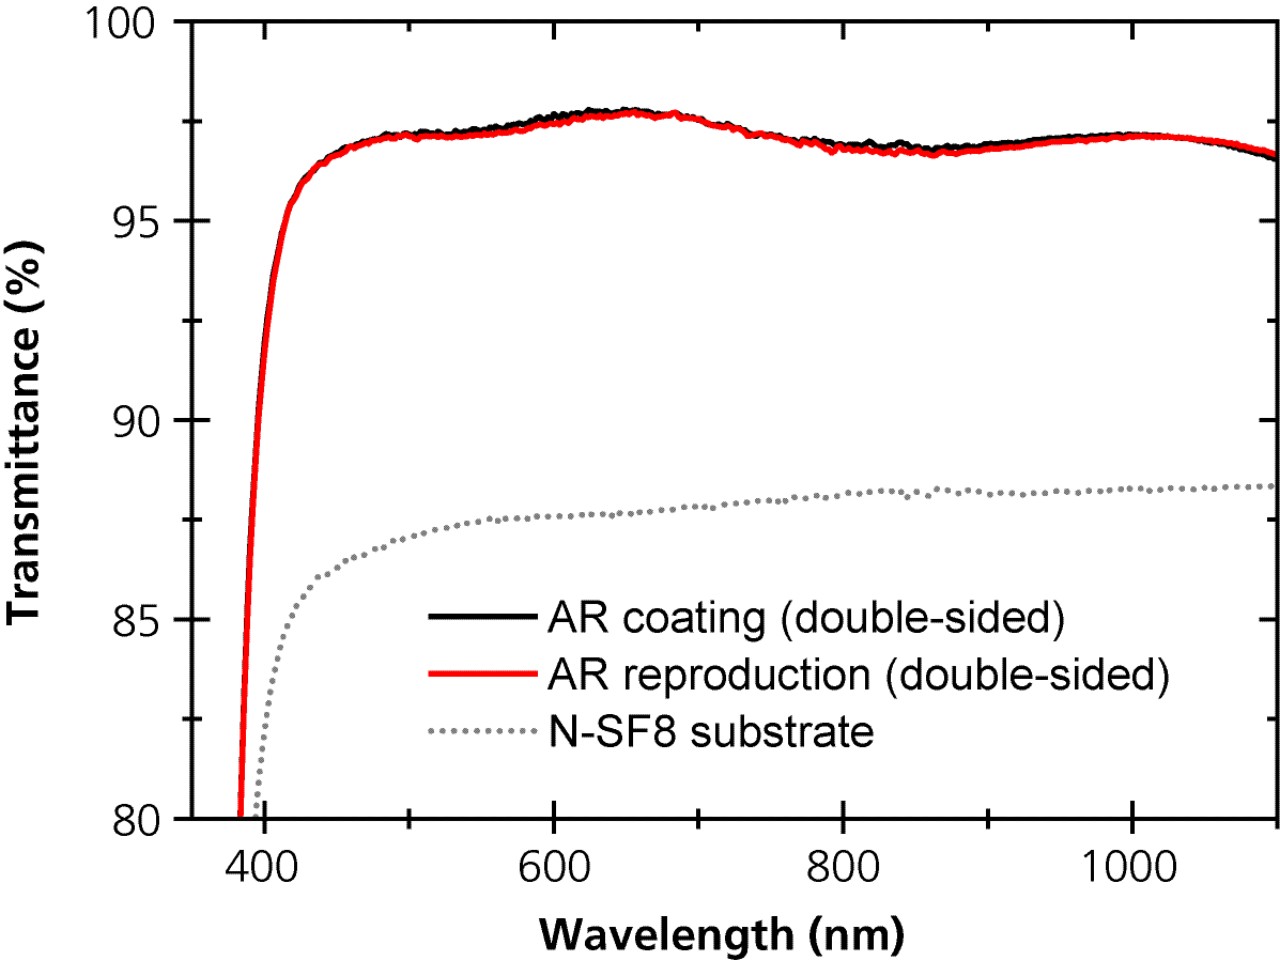 Chart with measured transmittance of a double-sided broadband antireflection coating on two NSF8 substrates.